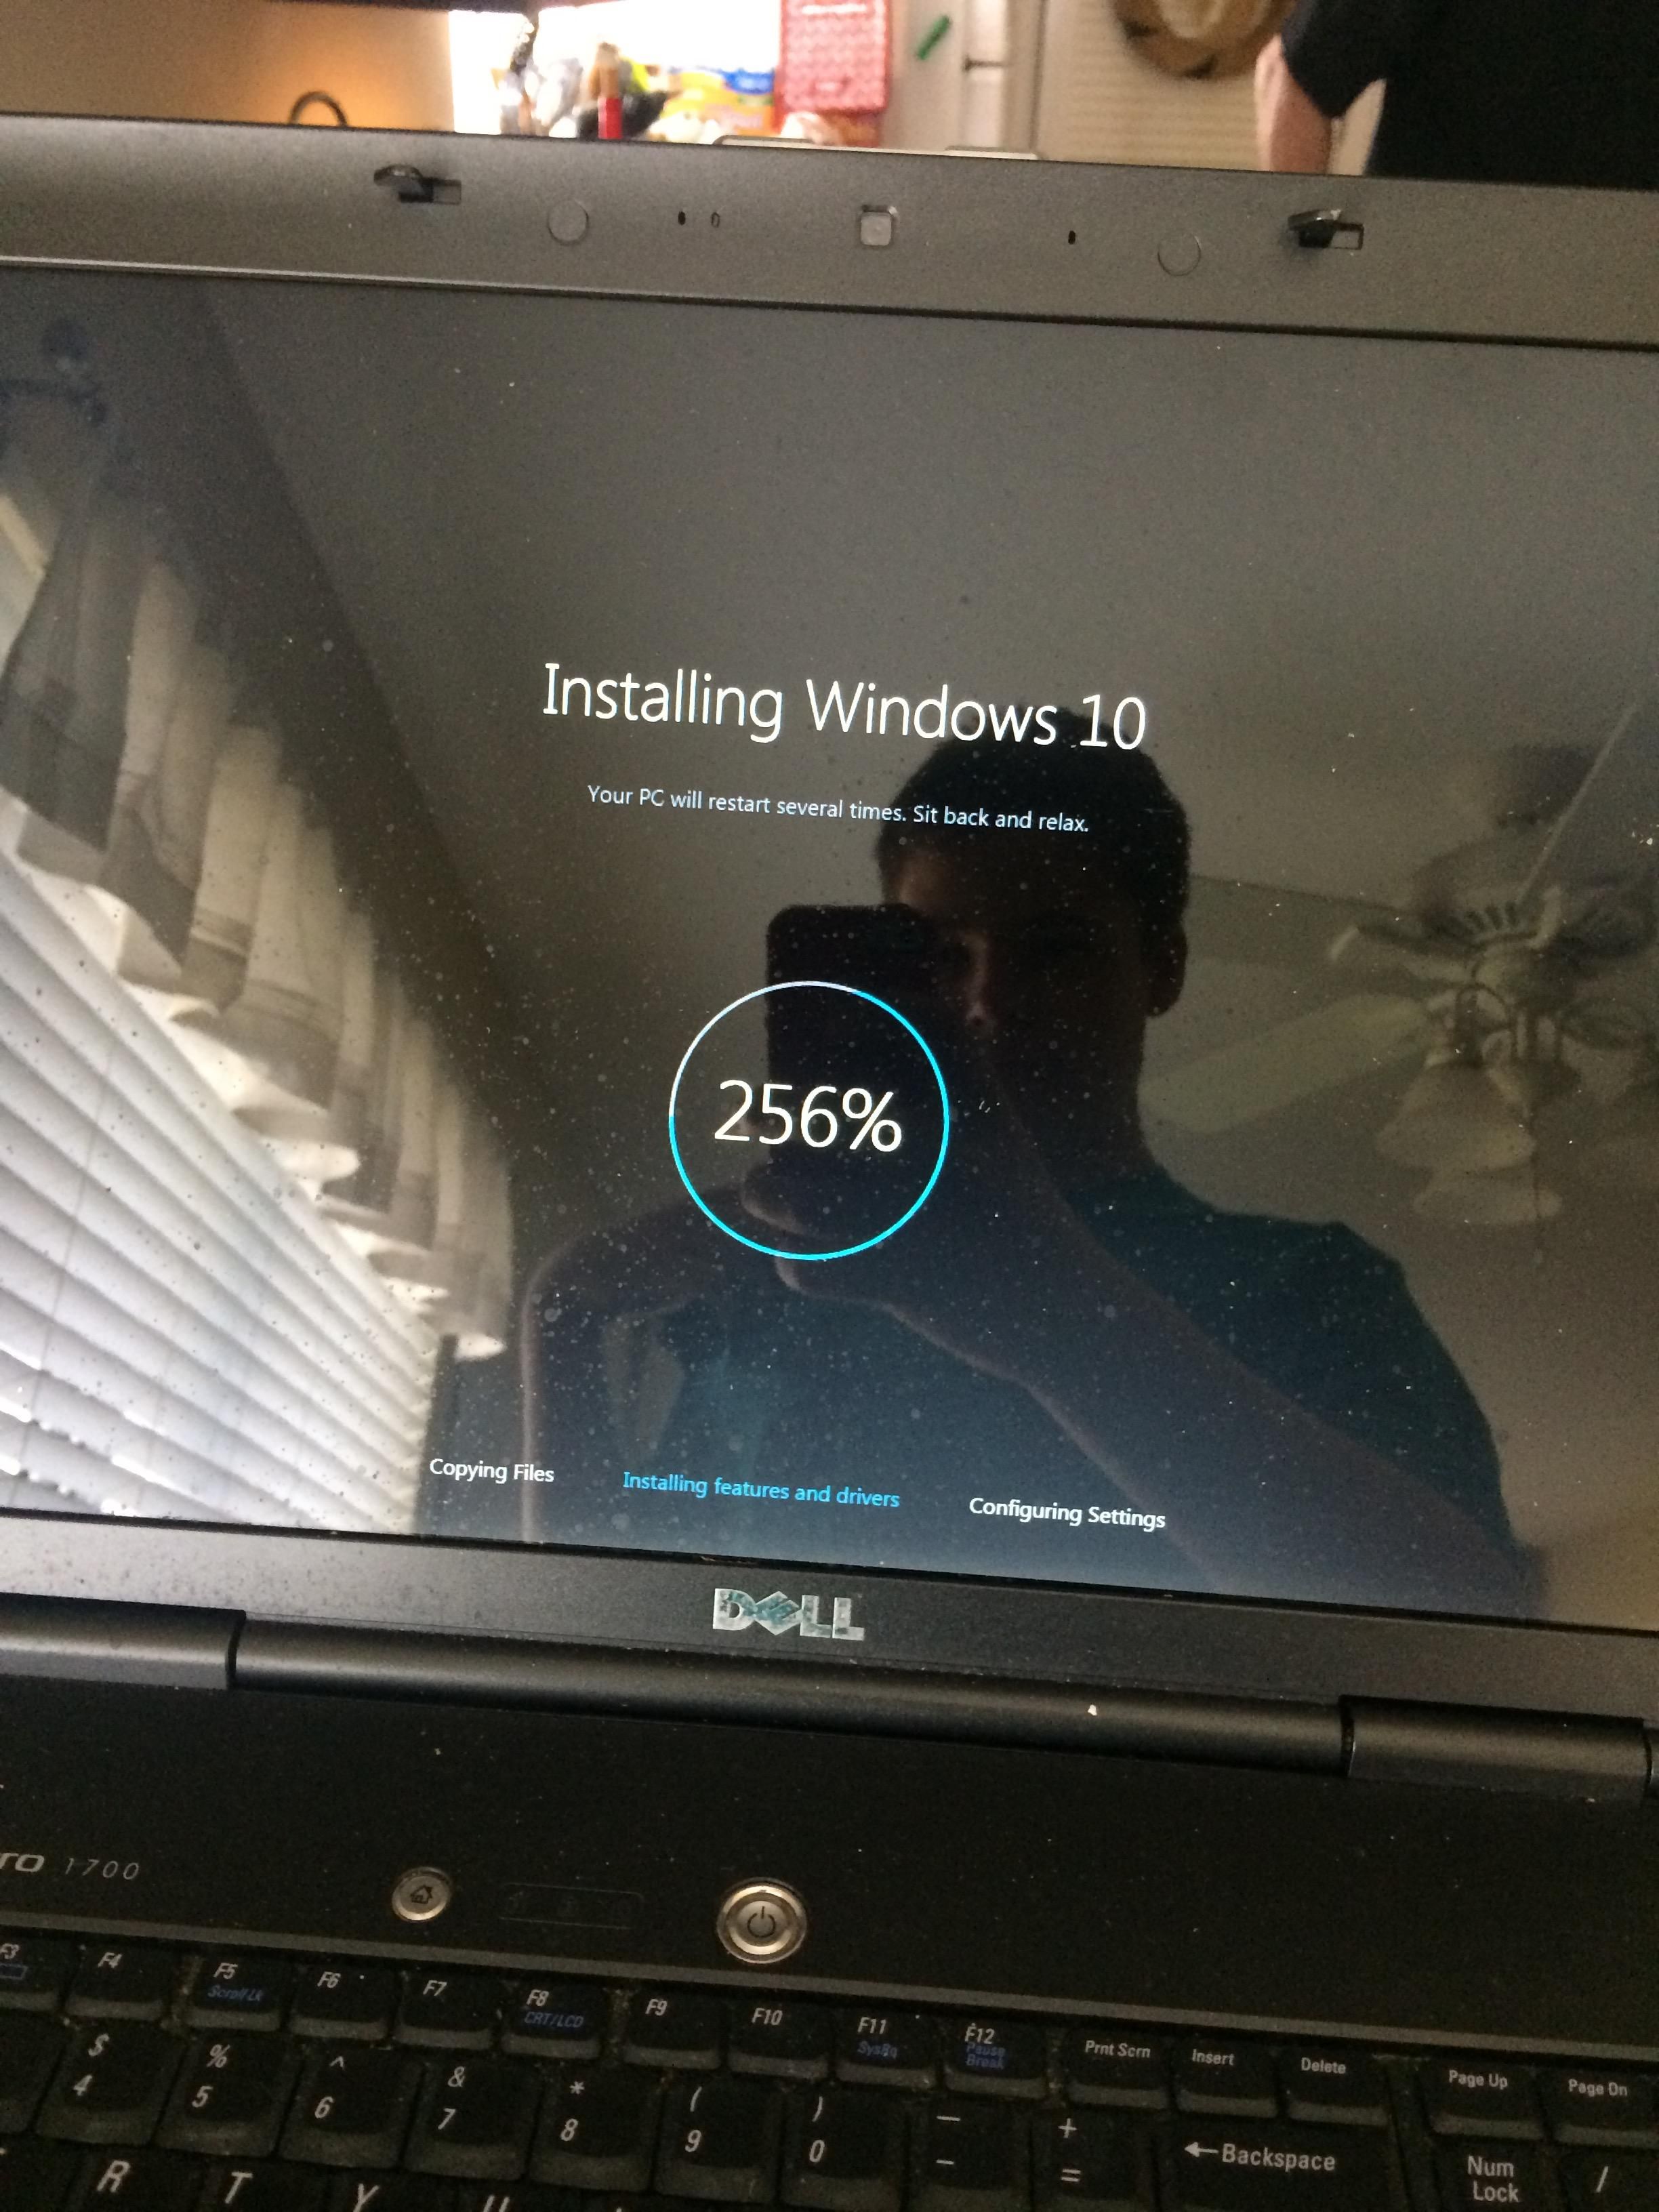 Windows has successfully installed itself 2.56 times.